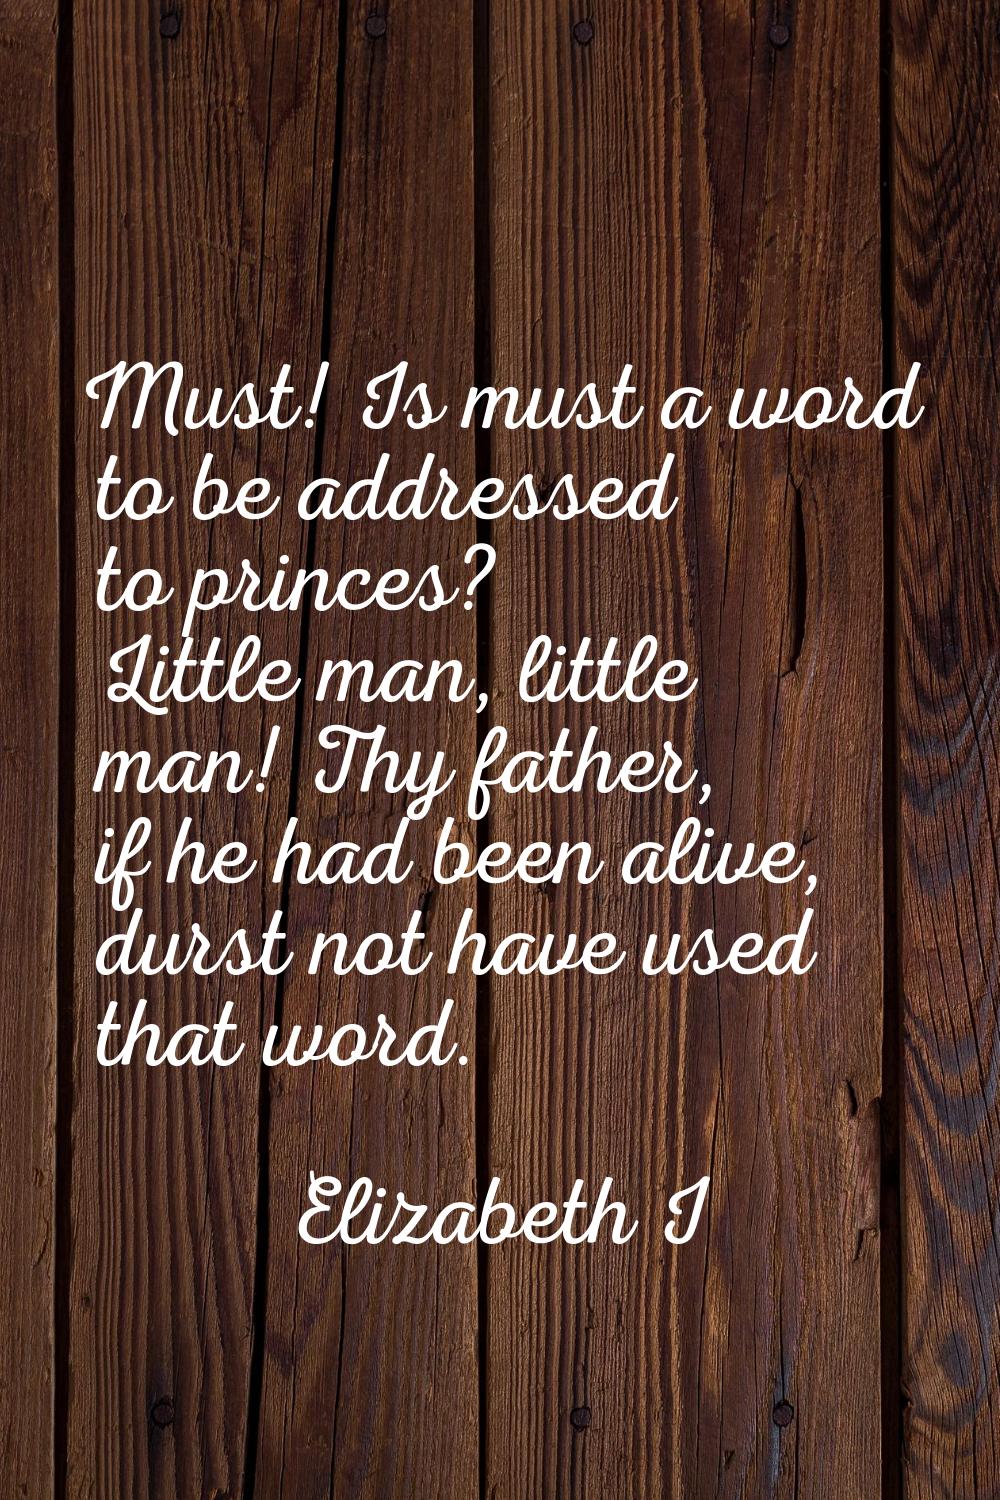 Must! Is must a word to be addressed to princes? Little man, little man! Thy father, if he had been